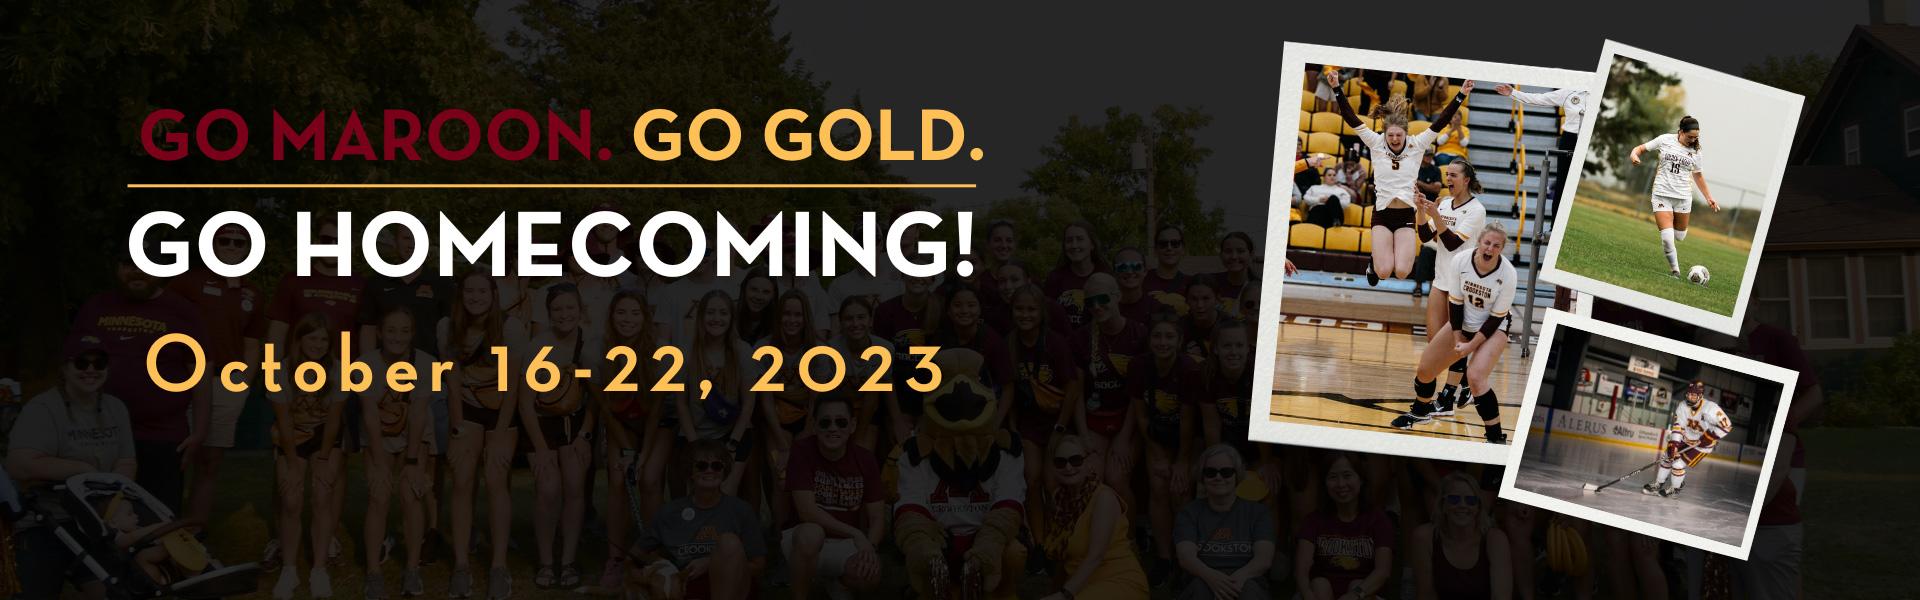 Homecoming is October 16-22, 2023 at University of Minnesota Crookston. Go Maroon. Go Gold. Go Homecoming!